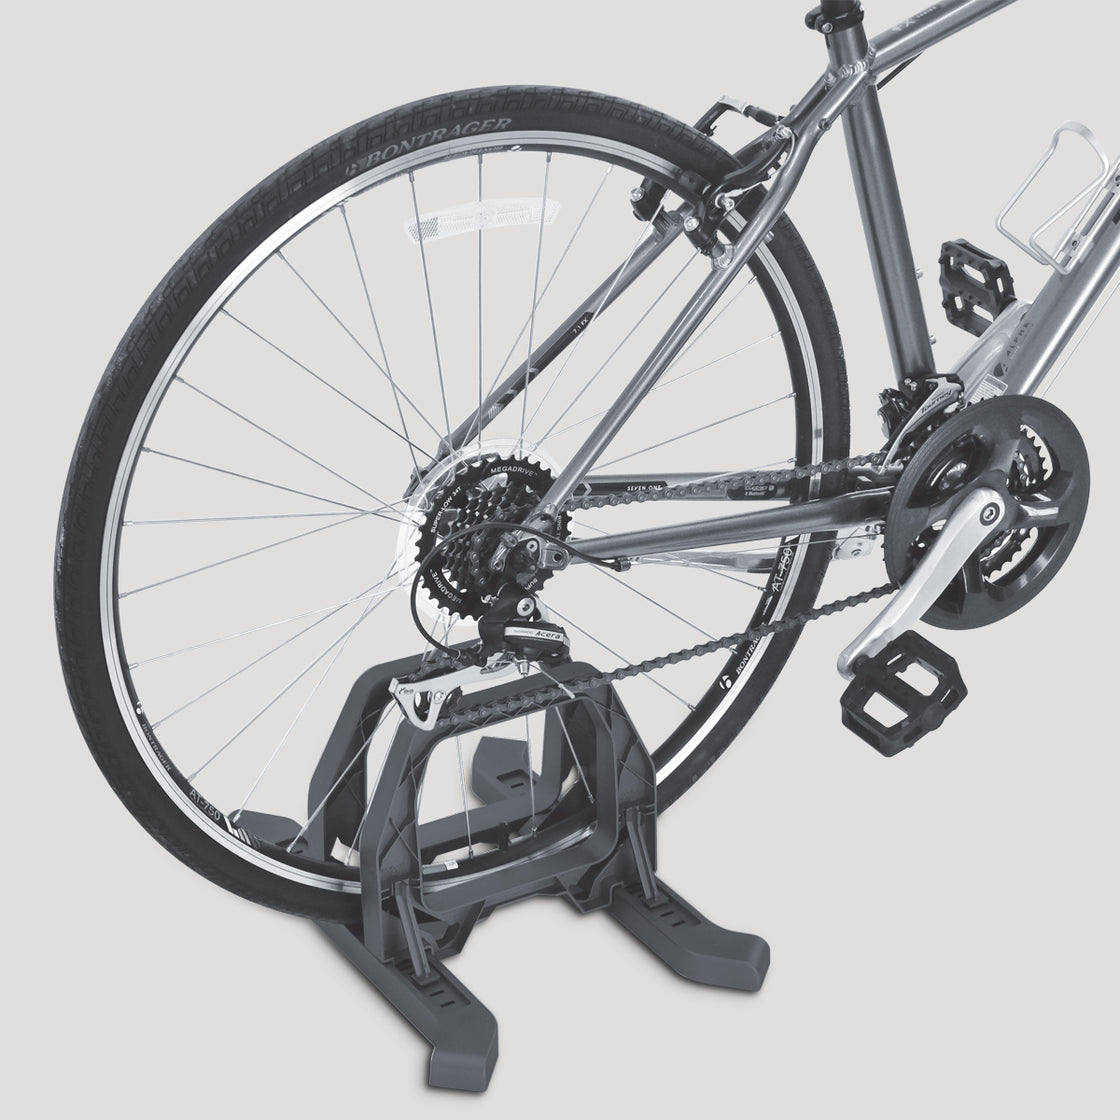 bicycle rear stand